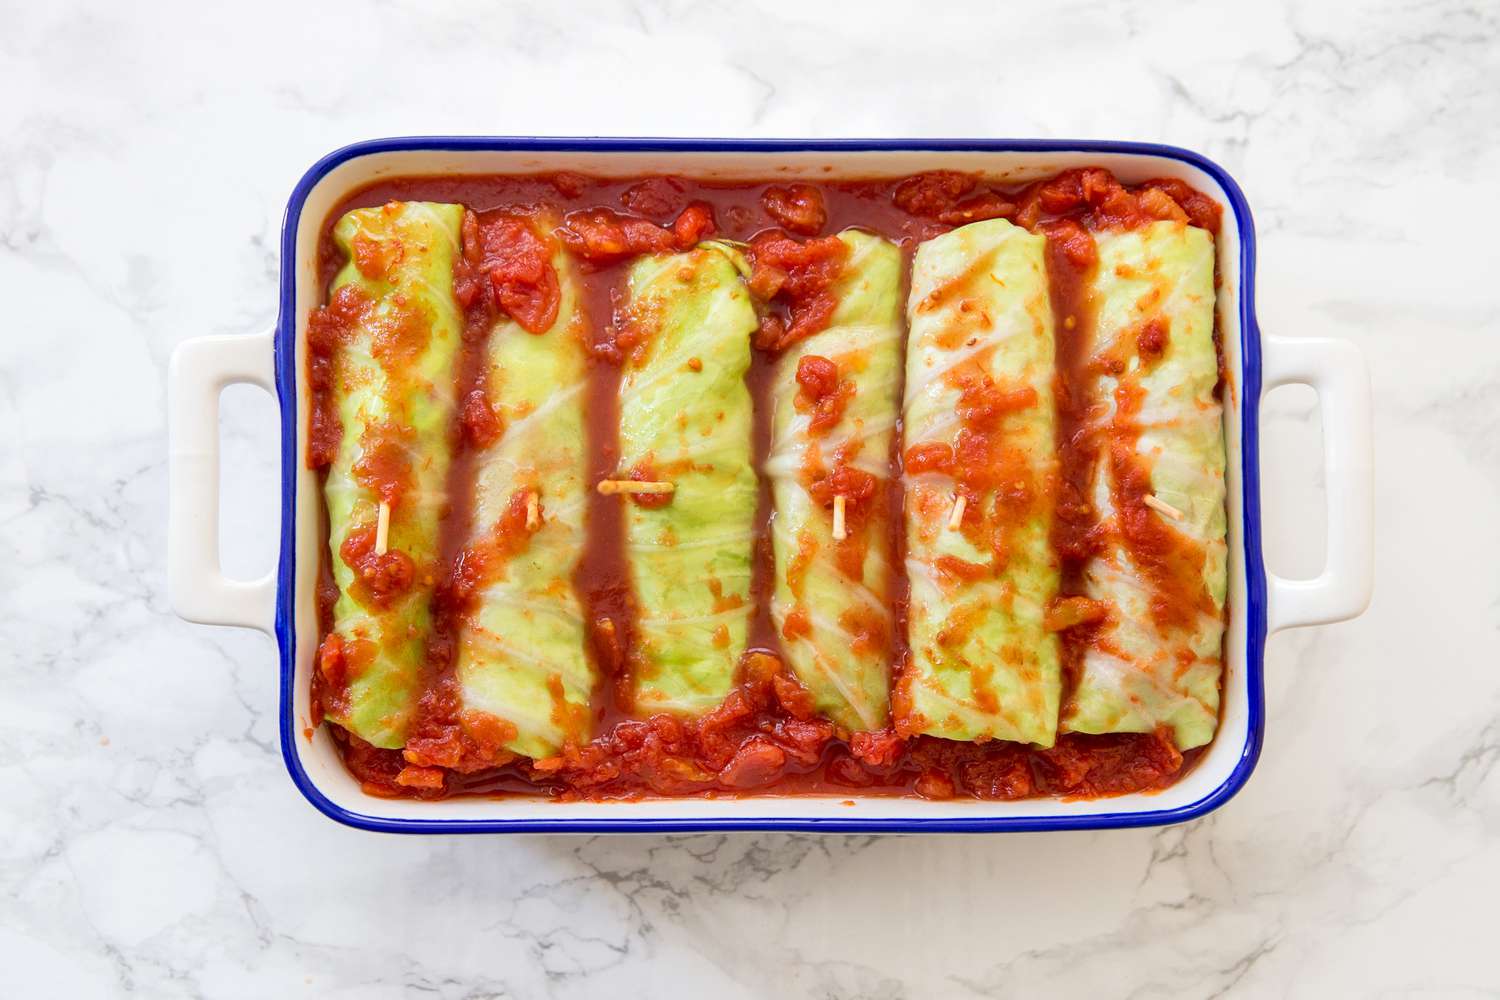 Cabbage rolls covered in tomato red sauce in a casserole dish